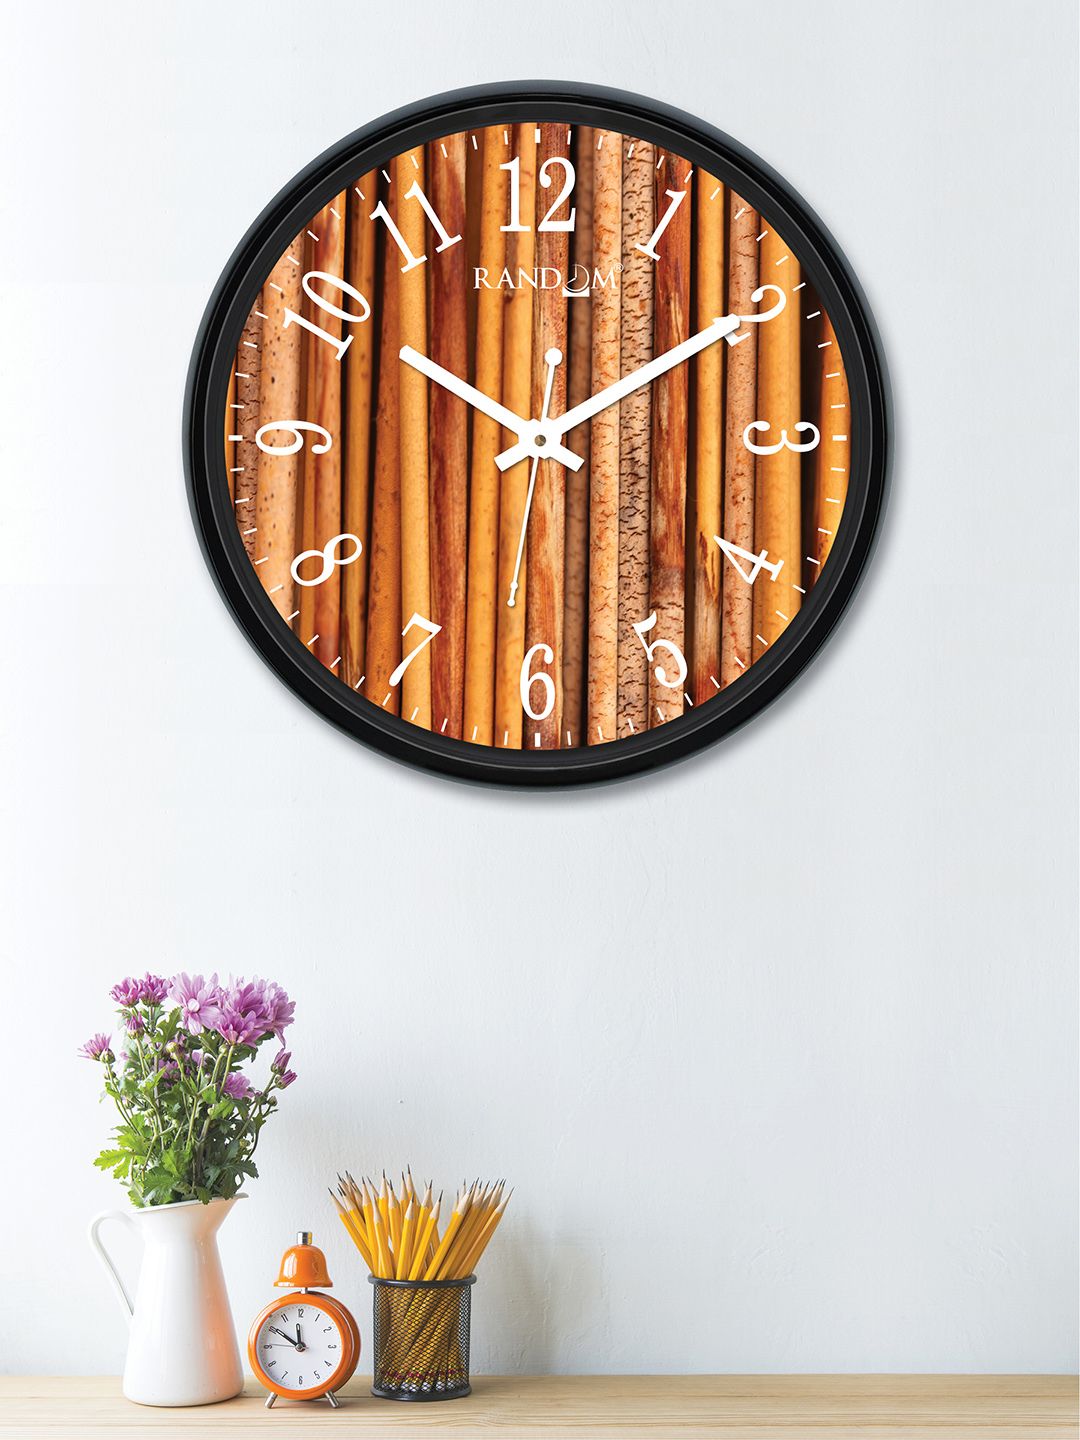 RANDOM Camel Brown & Yellow Round Striped 30 cm Analogue Wall Clock Price in India